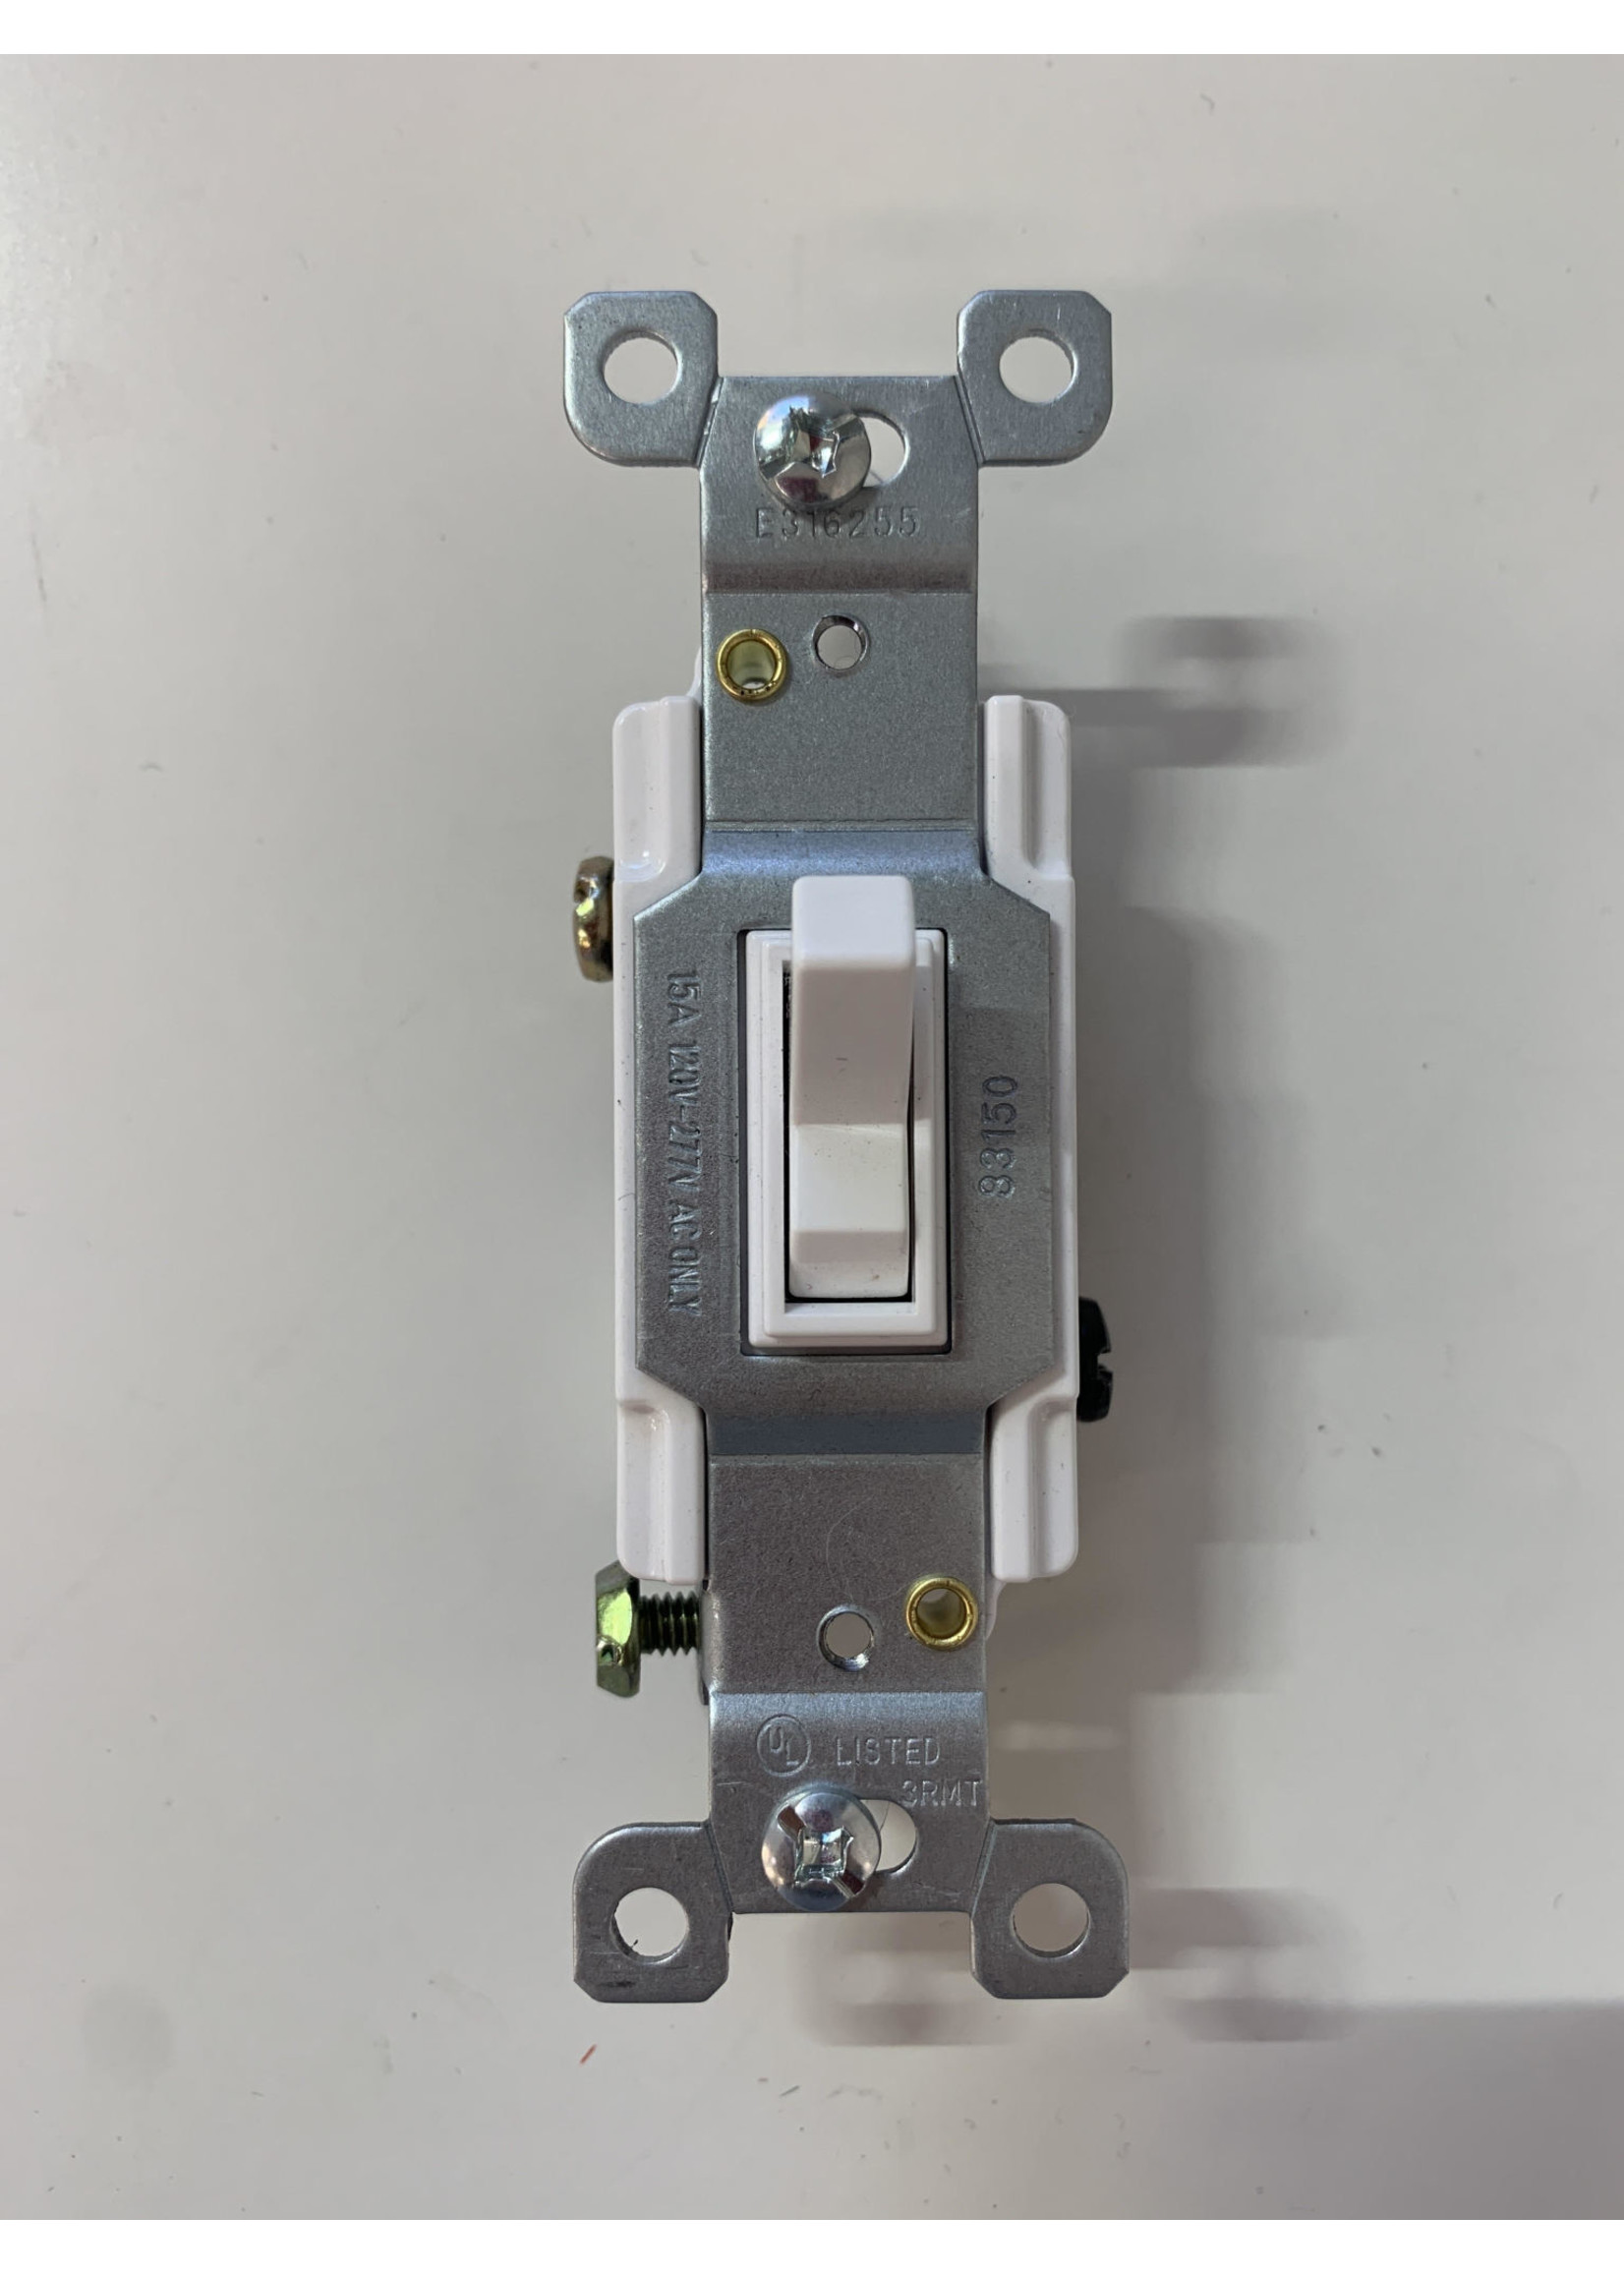 RESIDENTIAL TOGGLE SWITCH, 3-WAY, 15A  (83150-W )